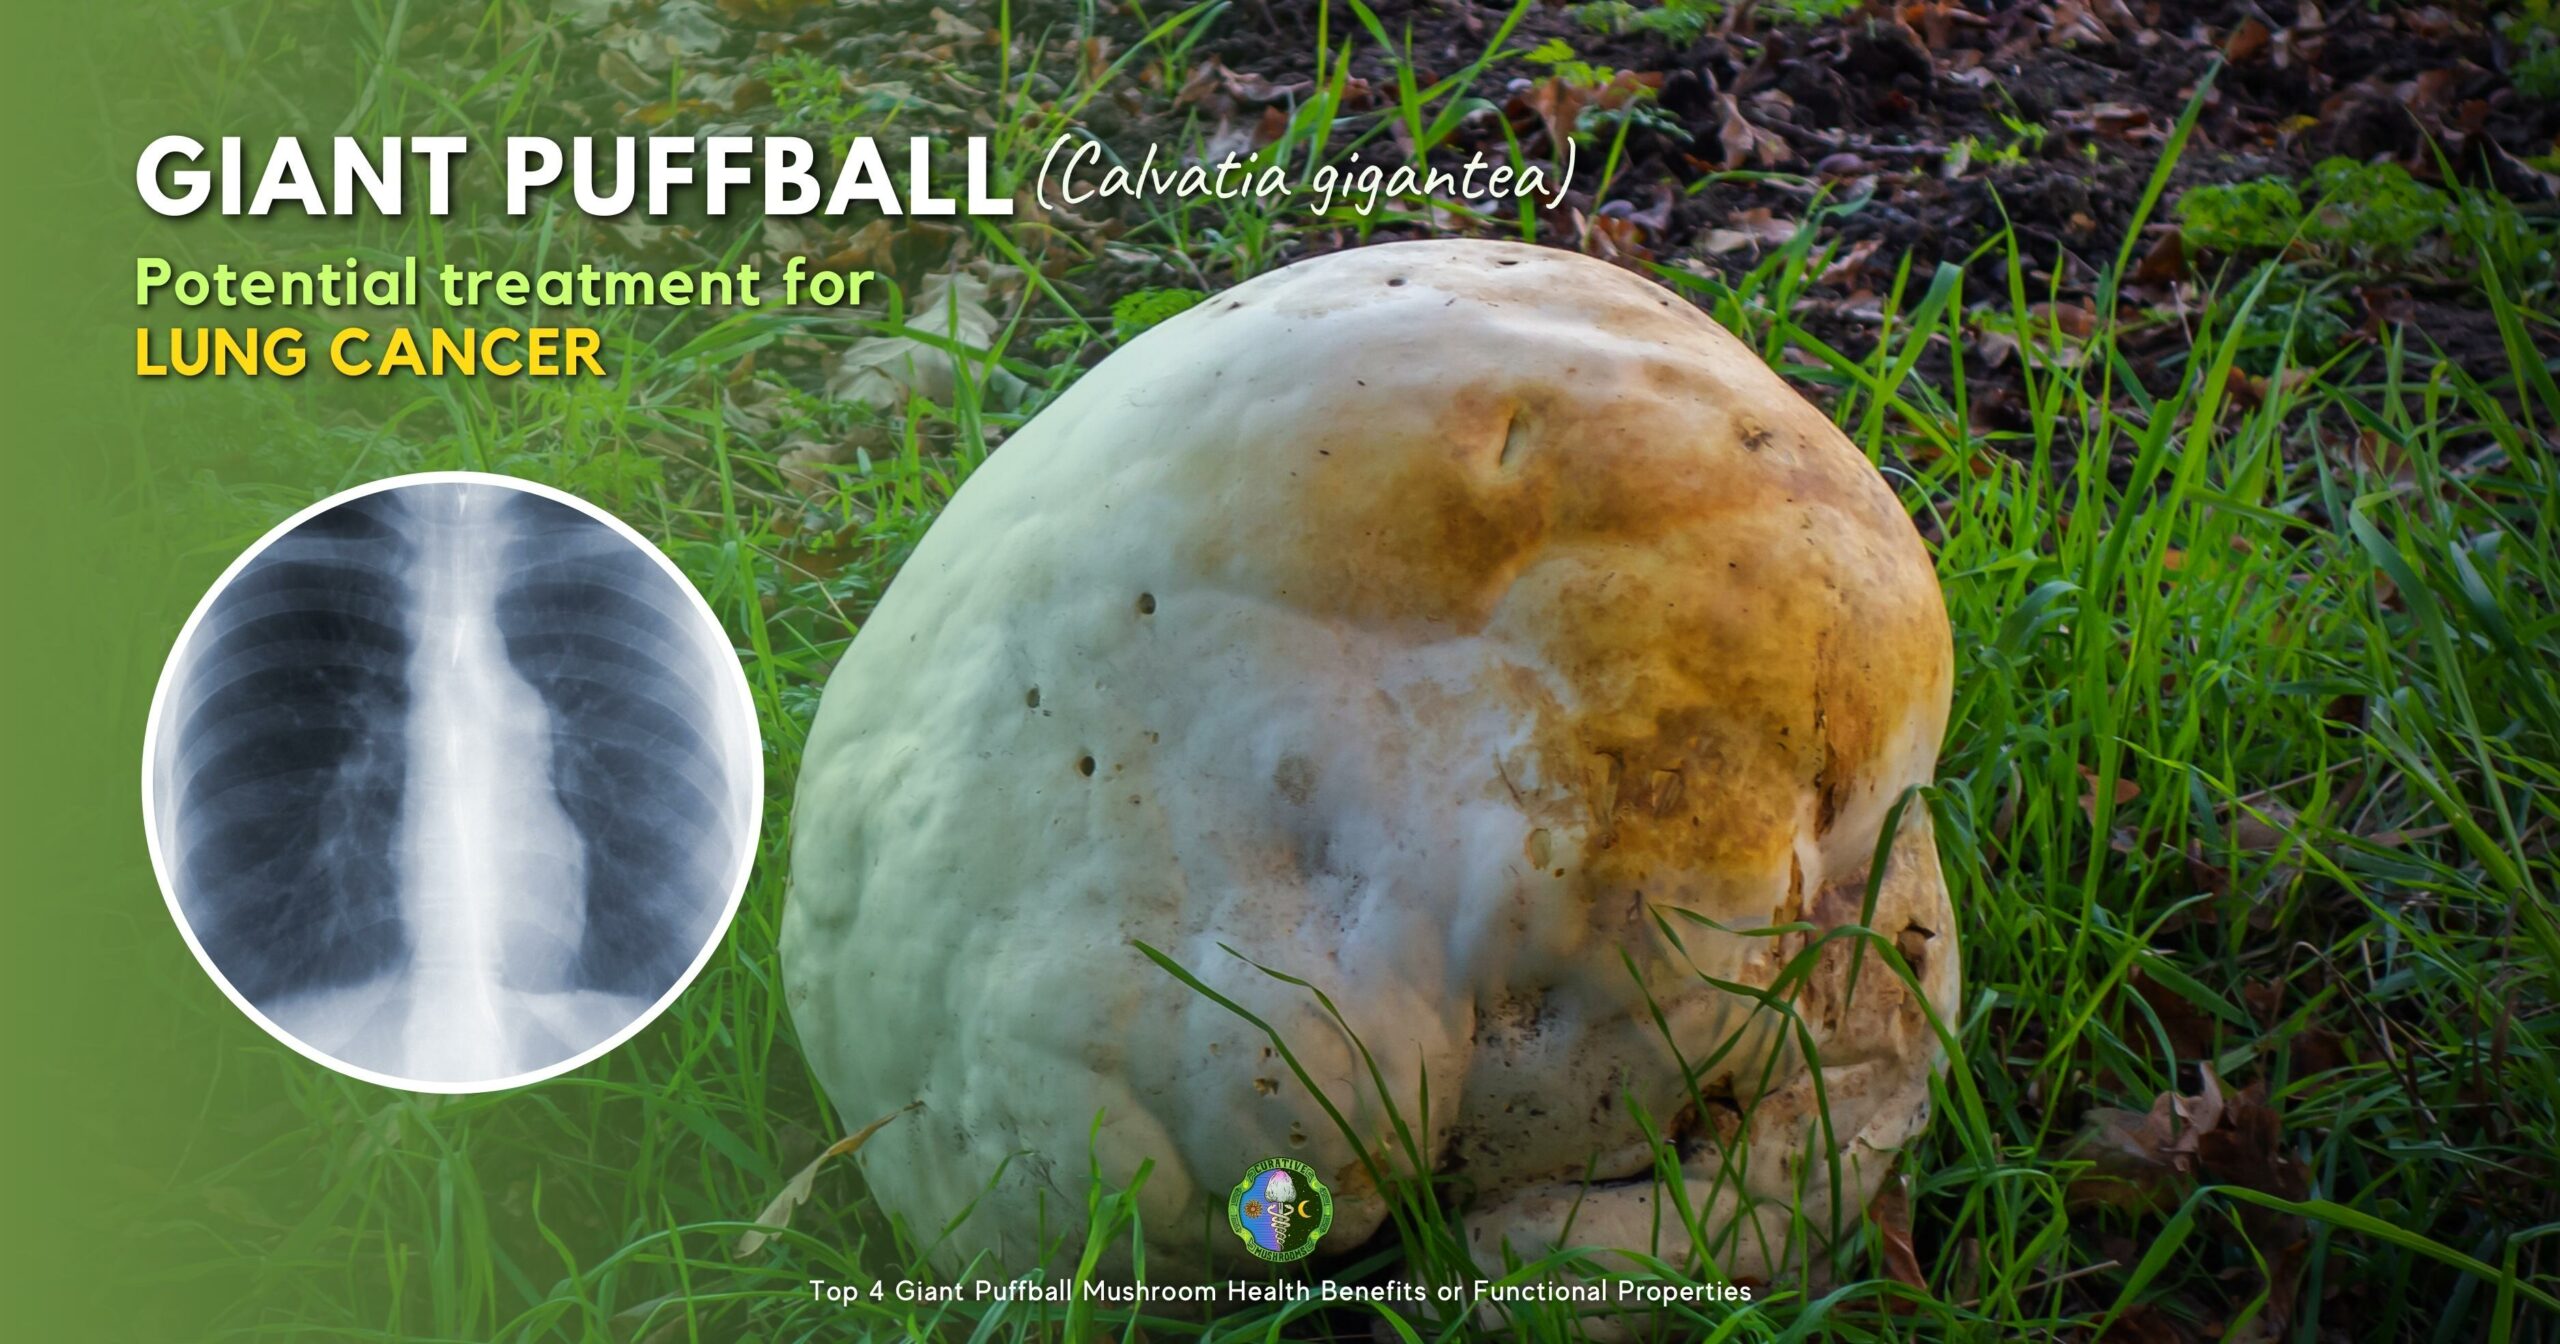 Giant Puffball potential treatment for lung cancer